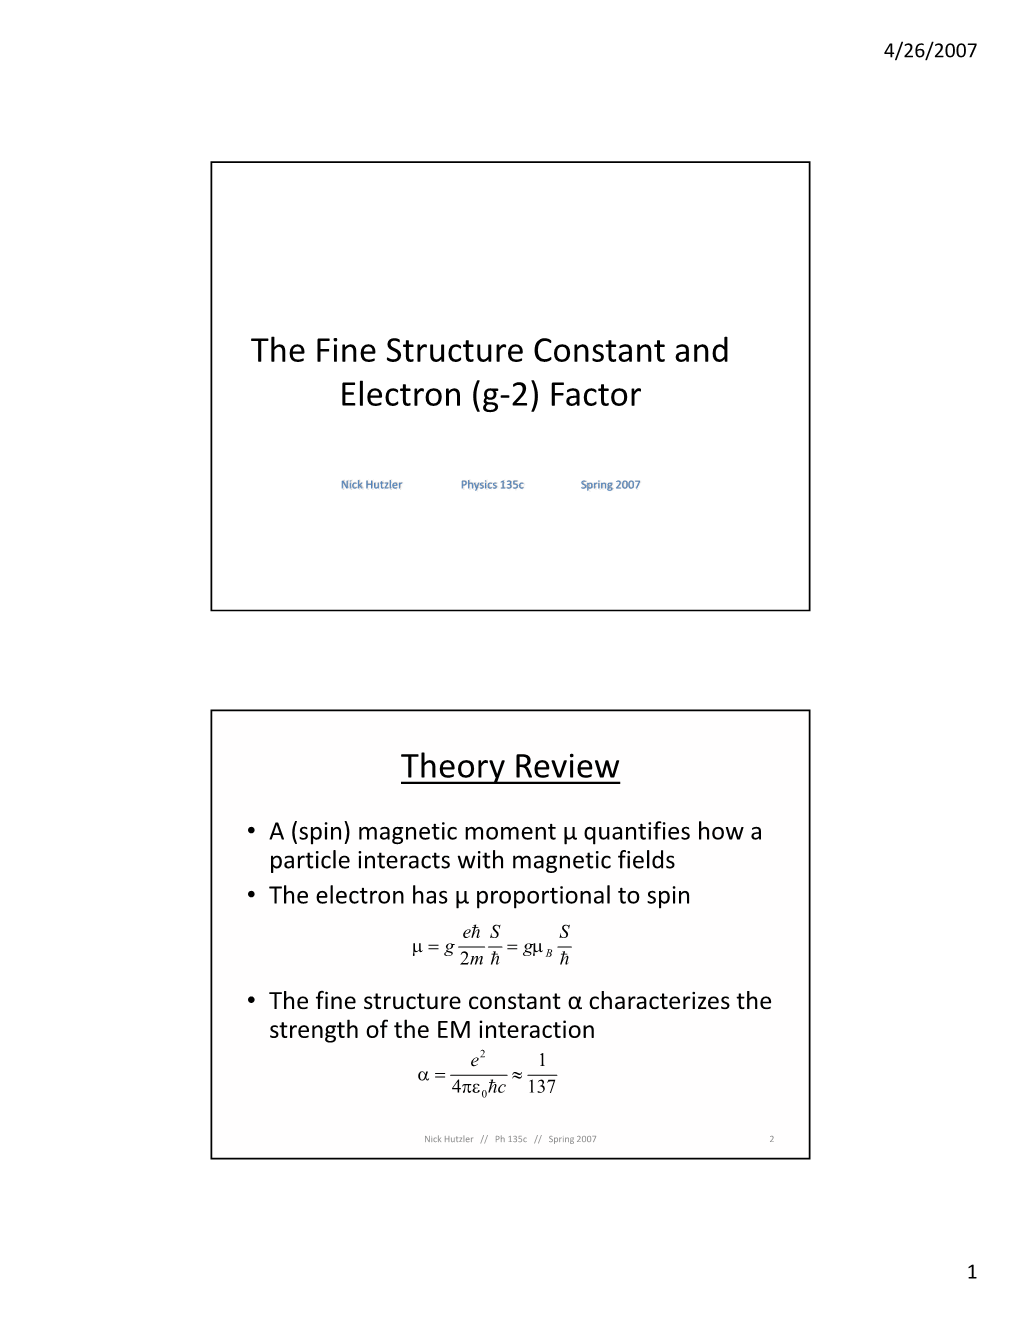 The Fine Structure Constant and Electron (G-2) Factor Theory Review